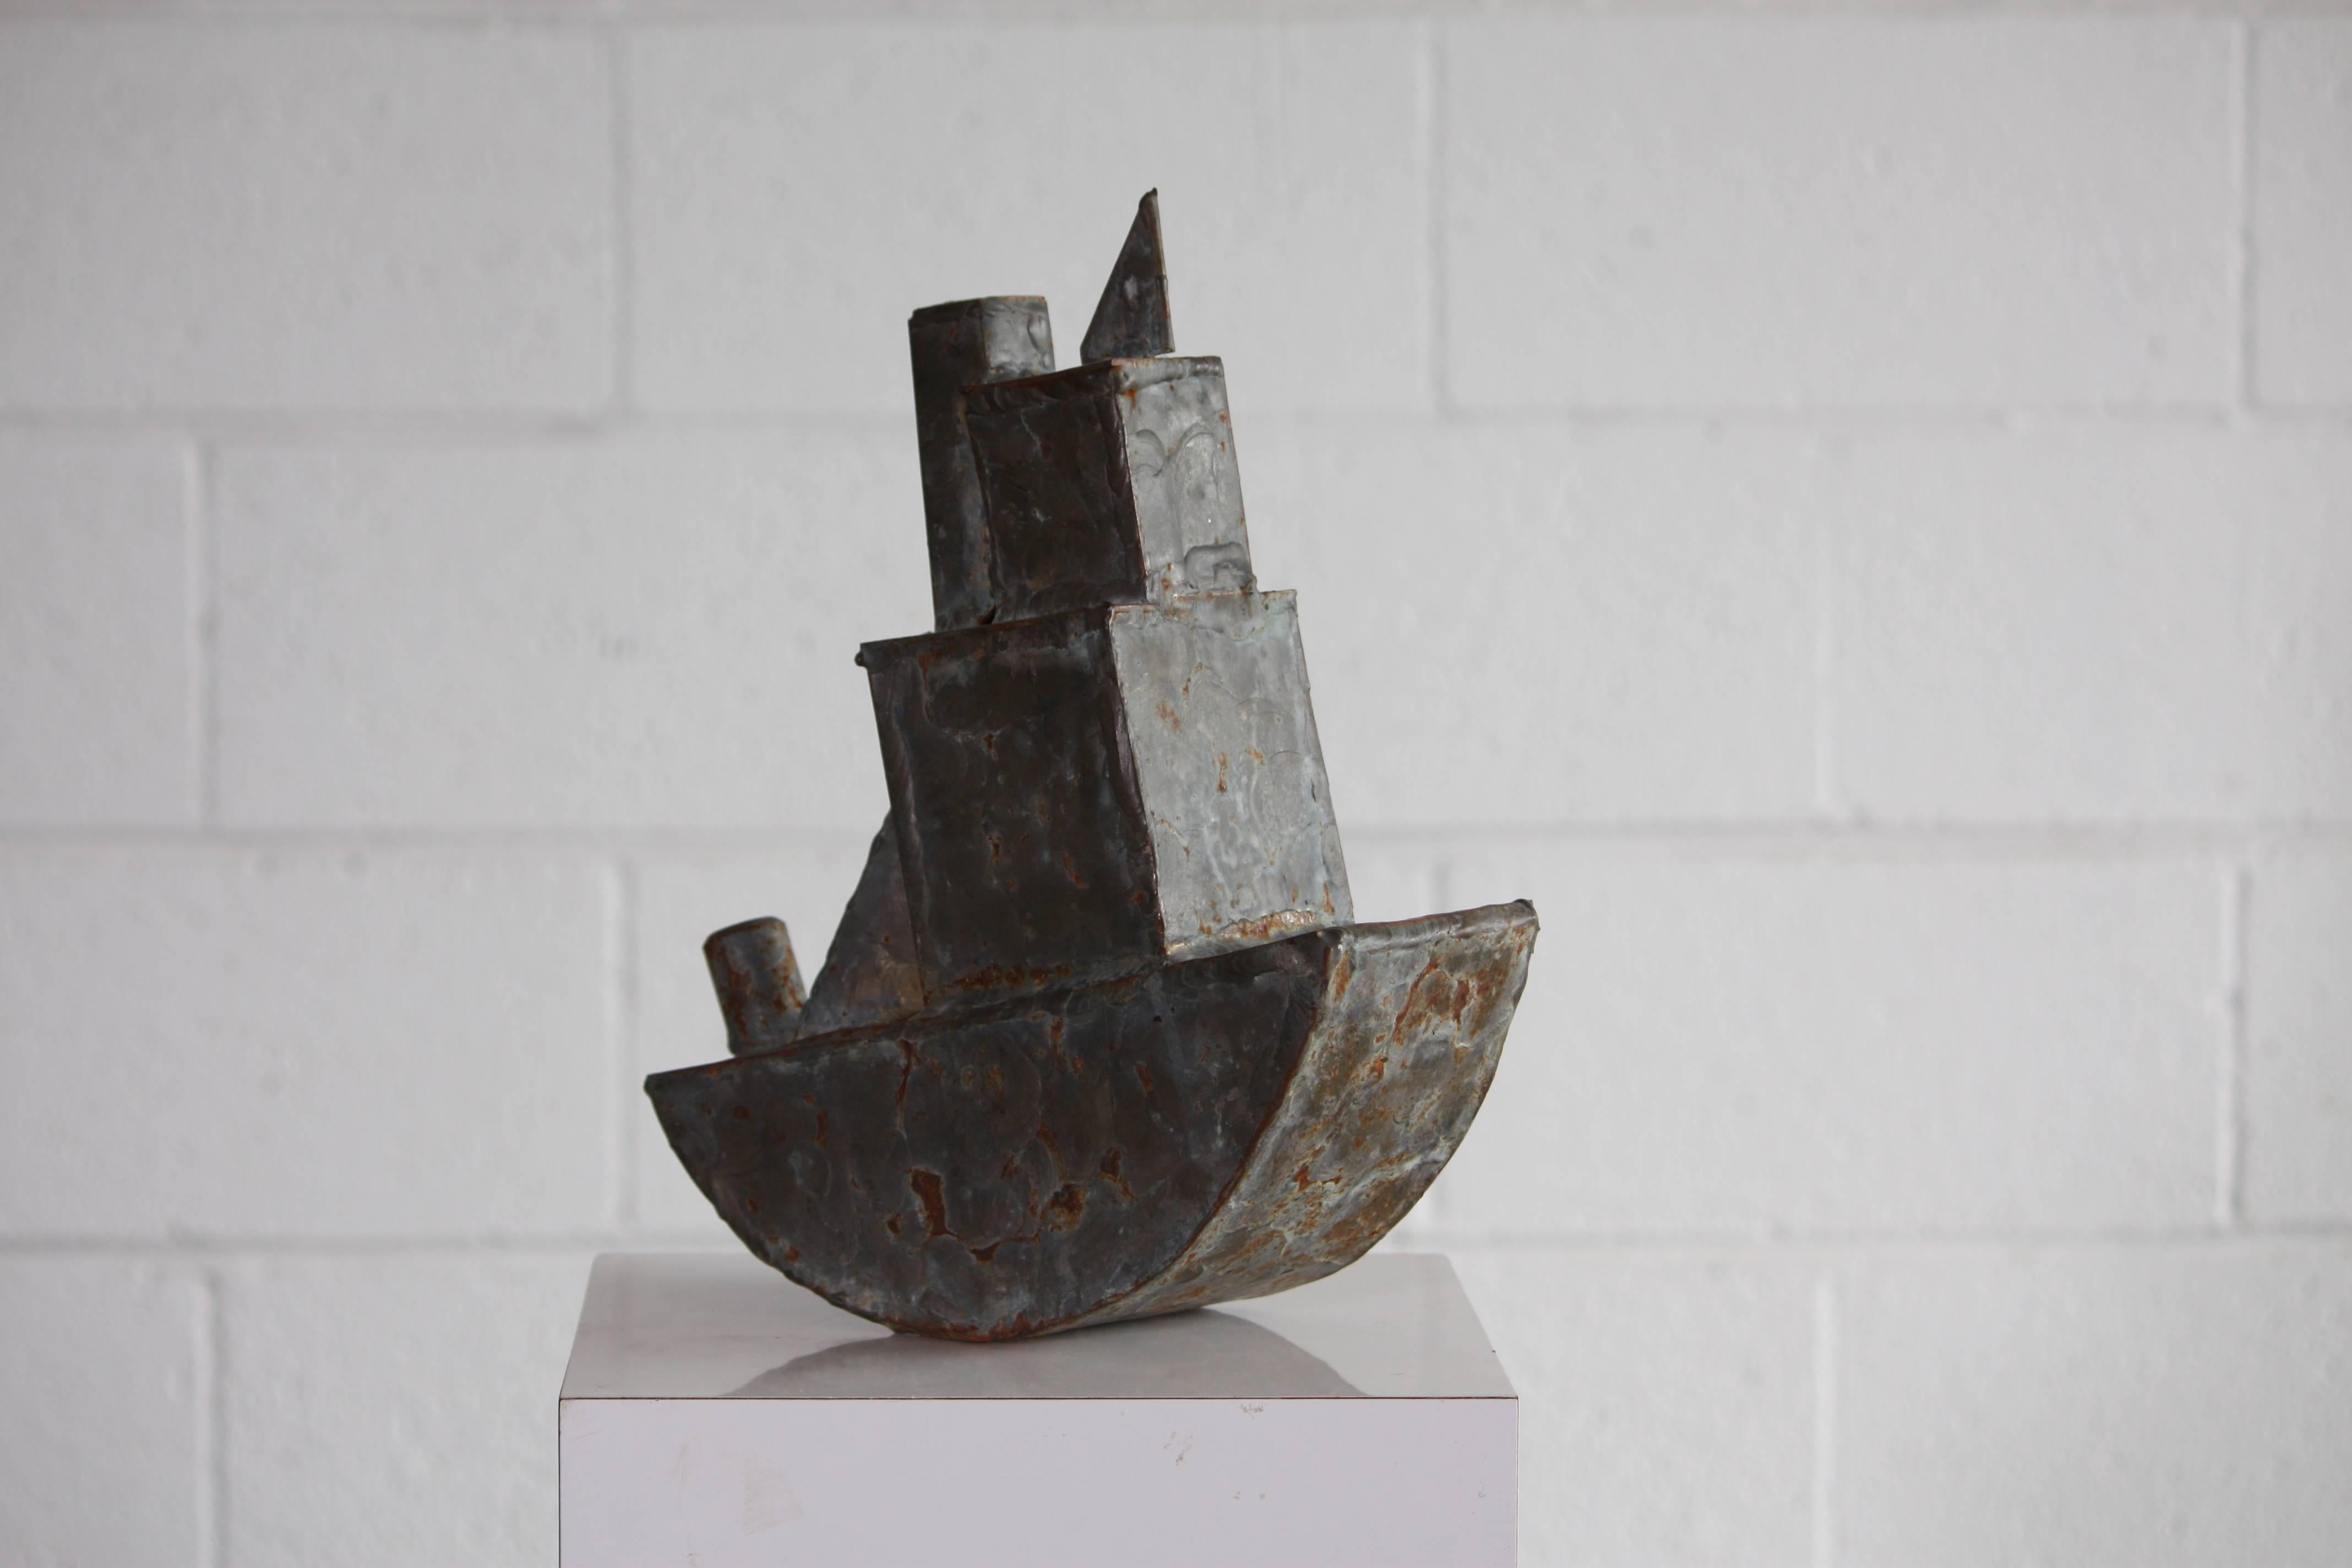 Unique handmade steel tugboat with patinated brass brazing finish. A wonderful addition to any boat collection or decorative piece. From the curated collection Space 20th Century.